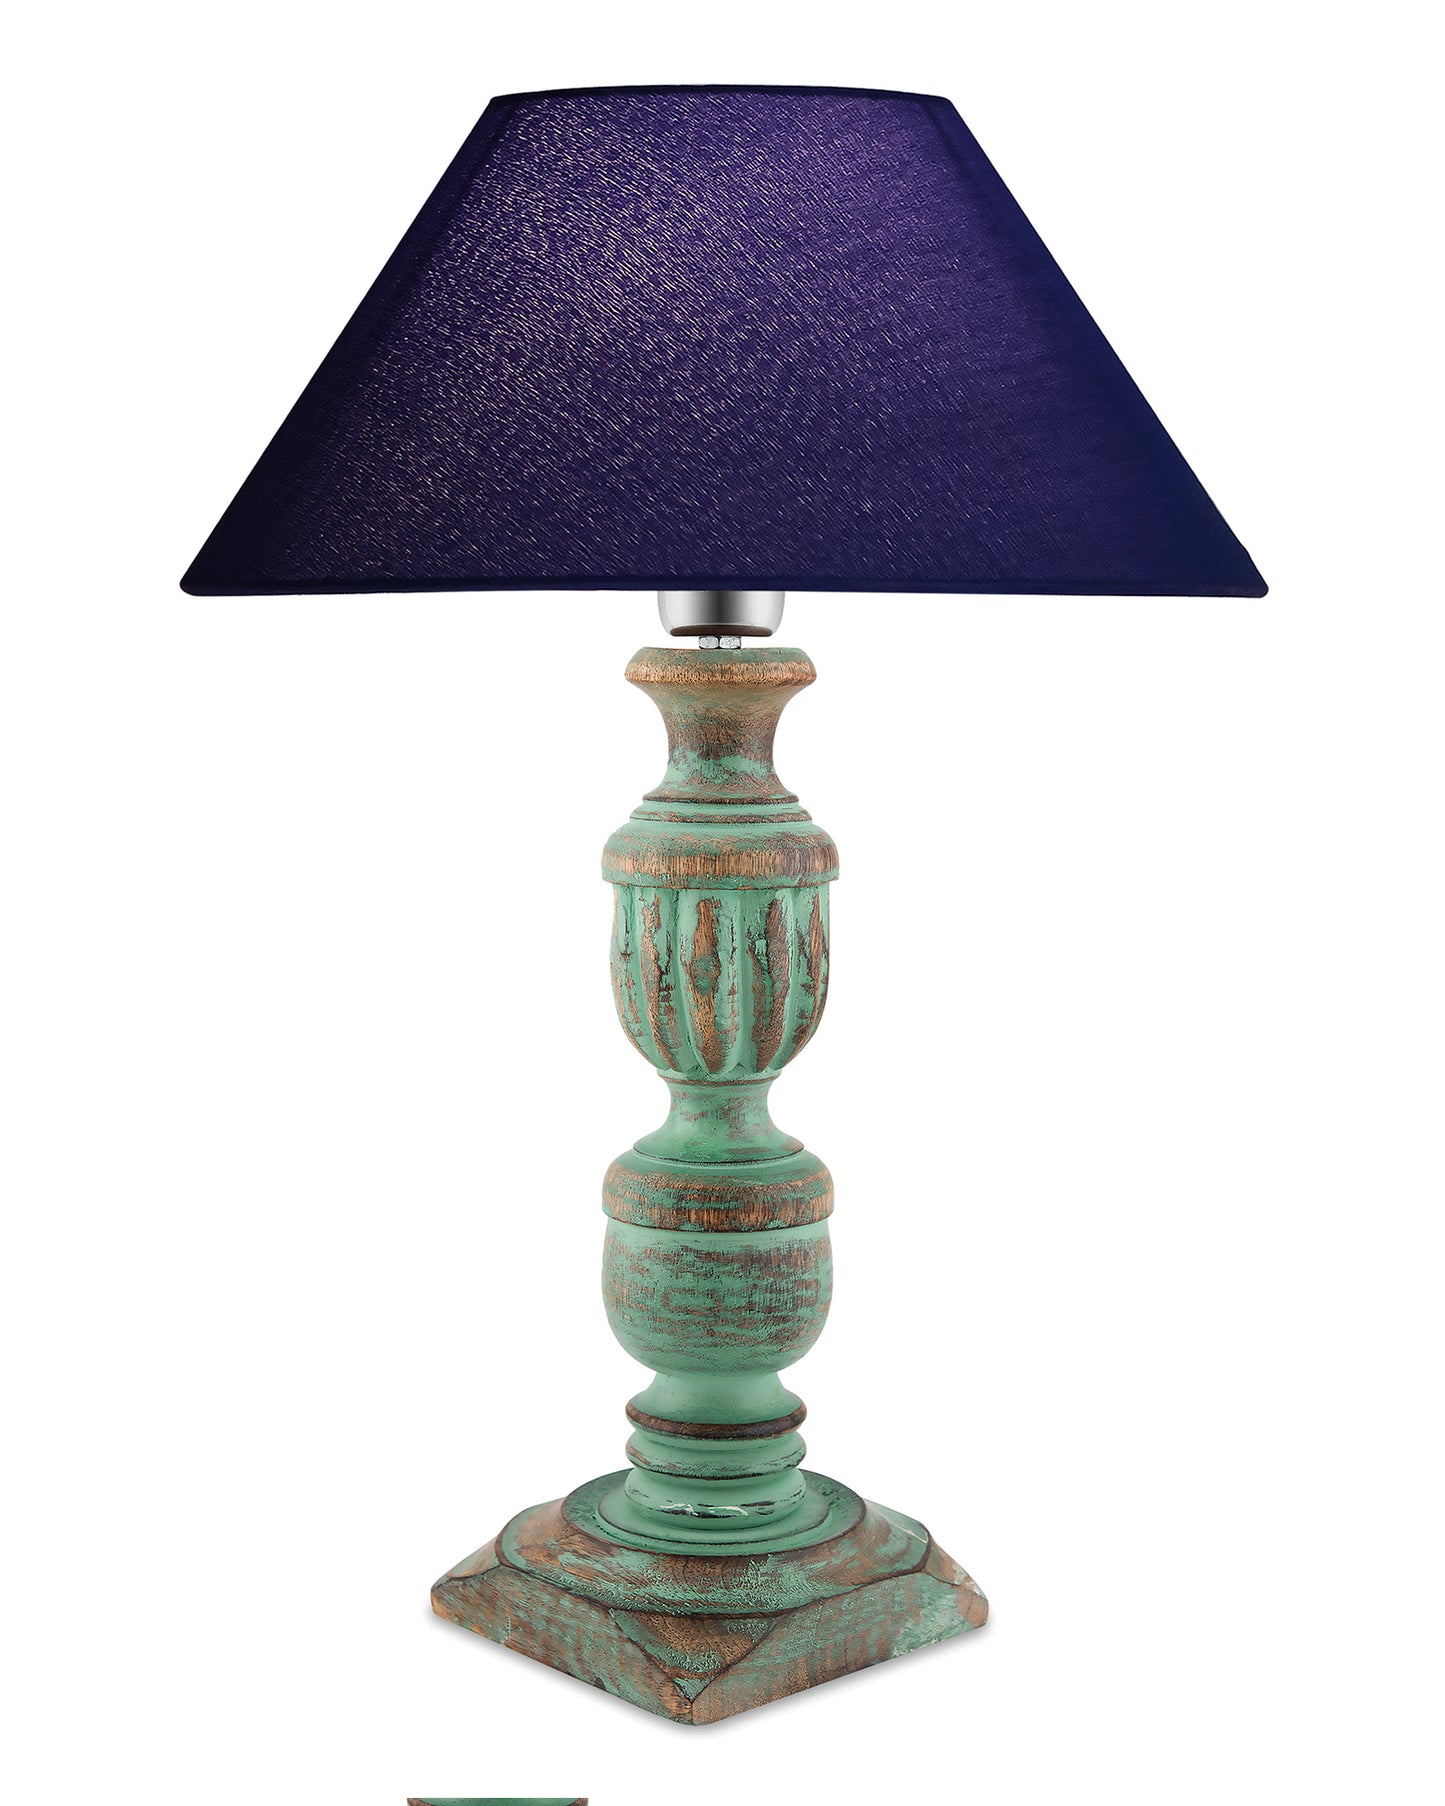 Rustic Algae French Trophy Carved Table lamp with Cone Shade